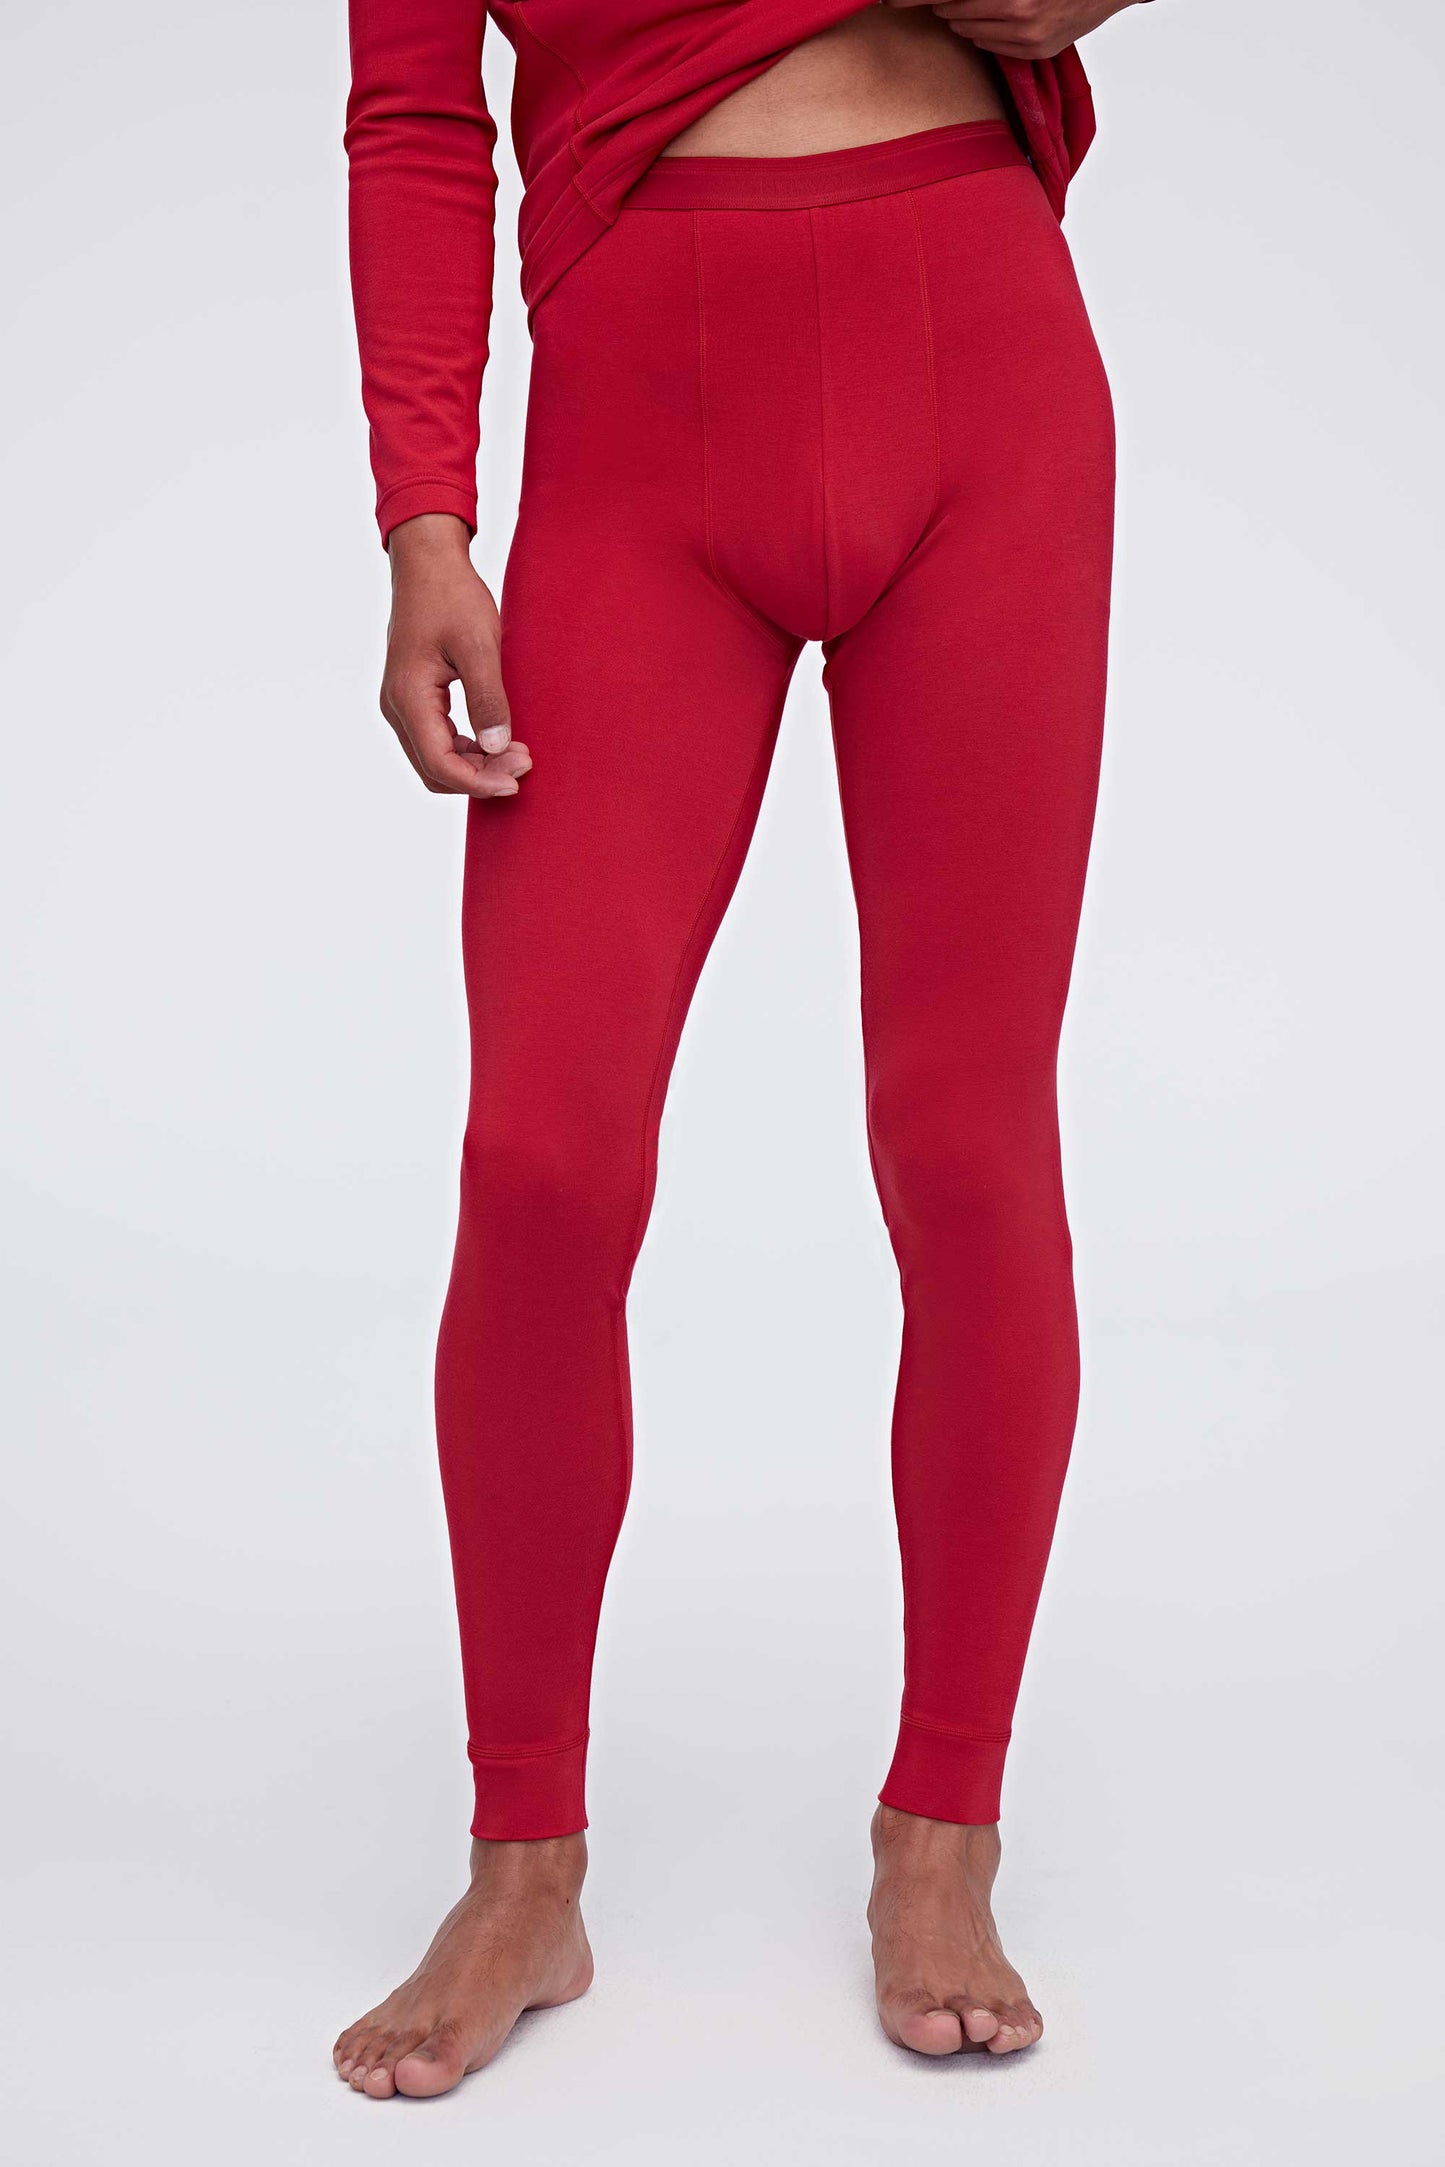 Front view of red thermal pants